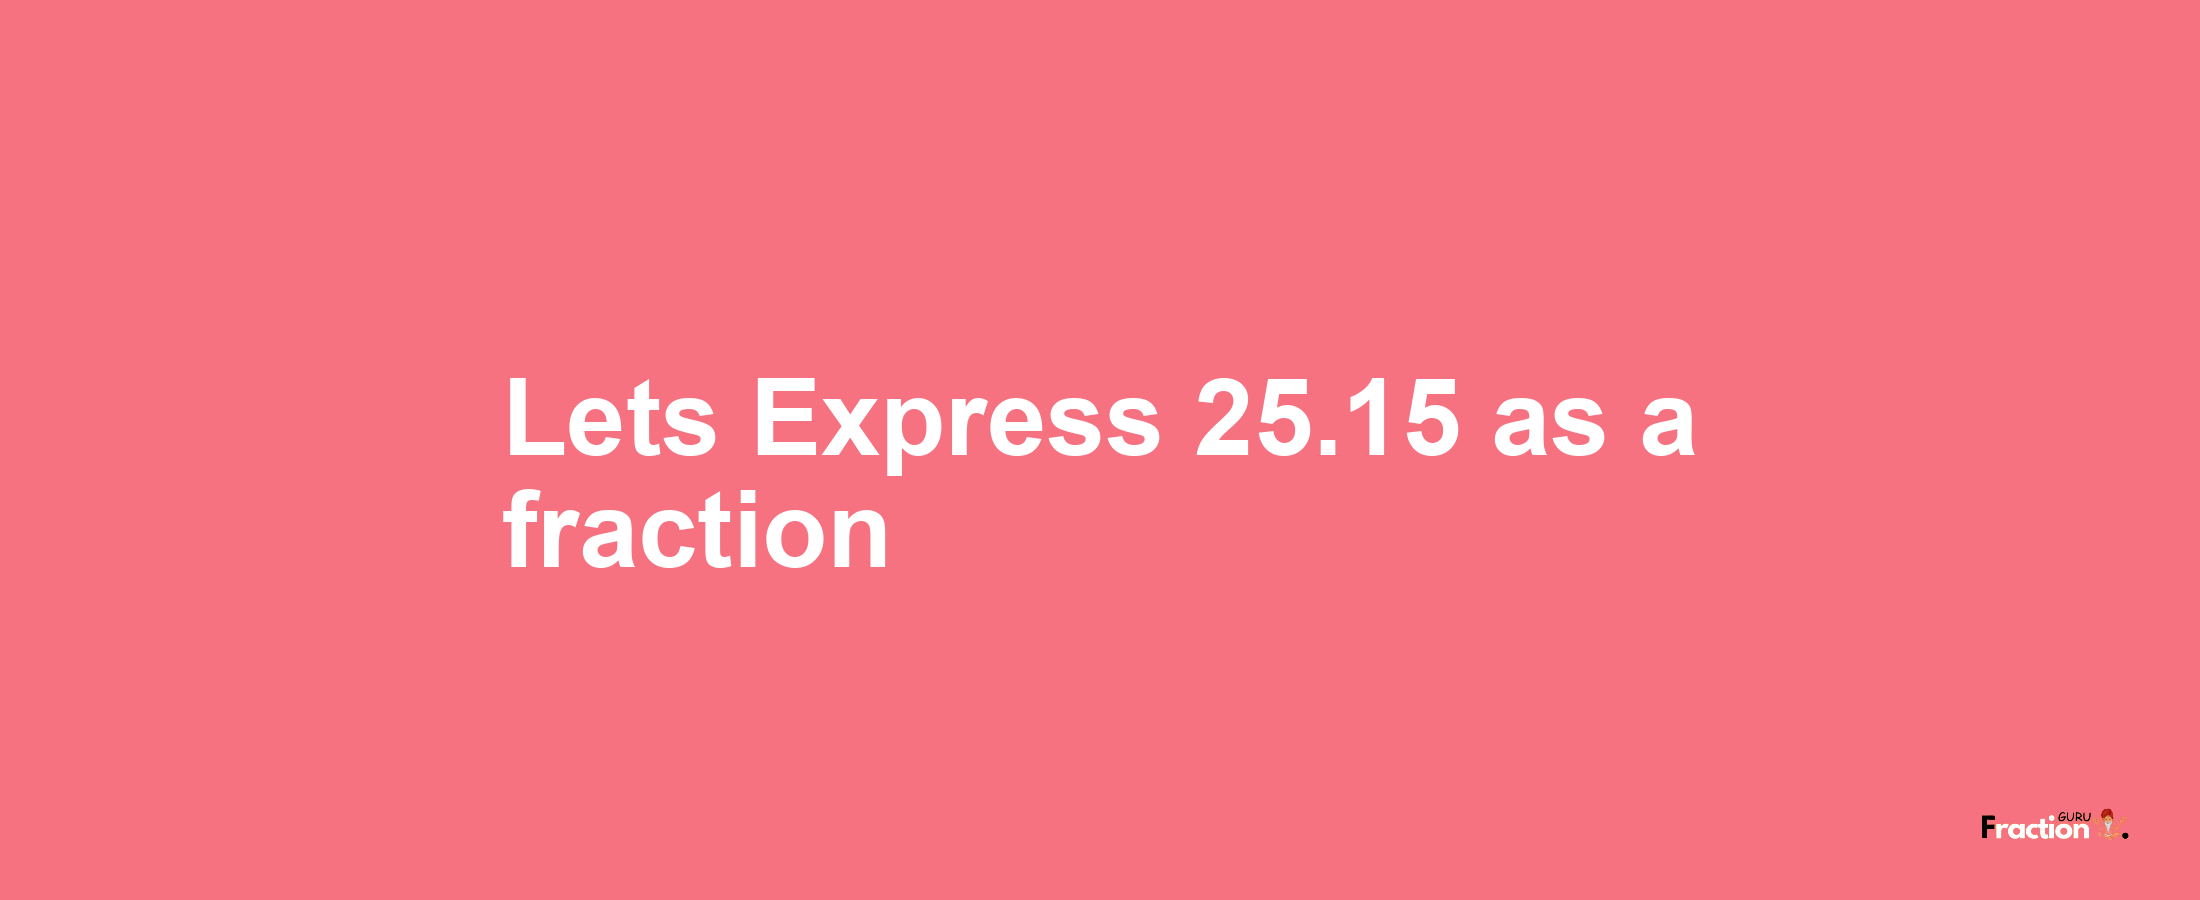 Lets Express 25.15 as afraction